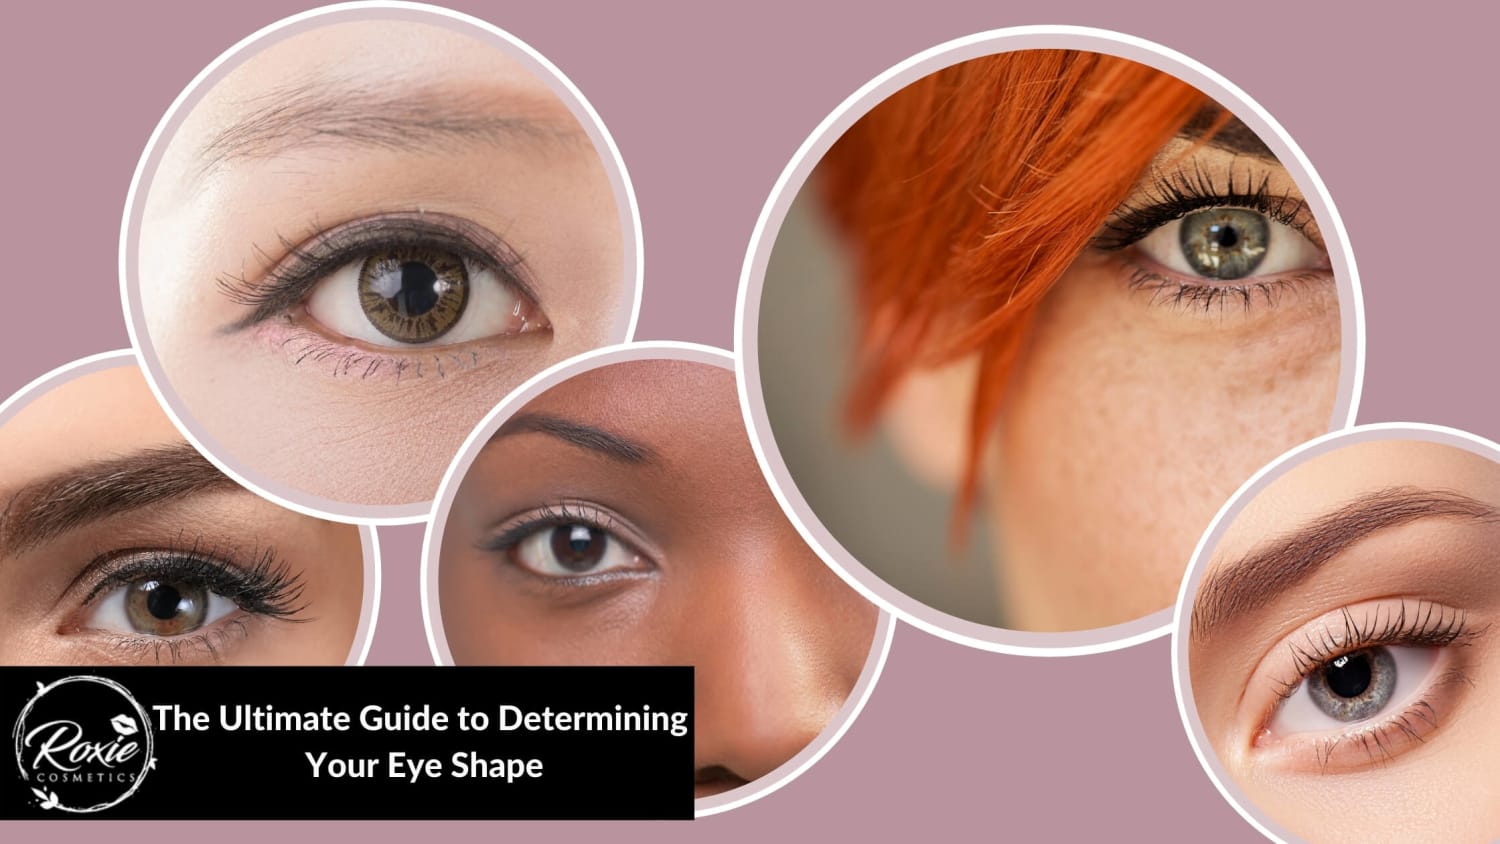 The Ultimate Guide to Determining Your Eye Shape